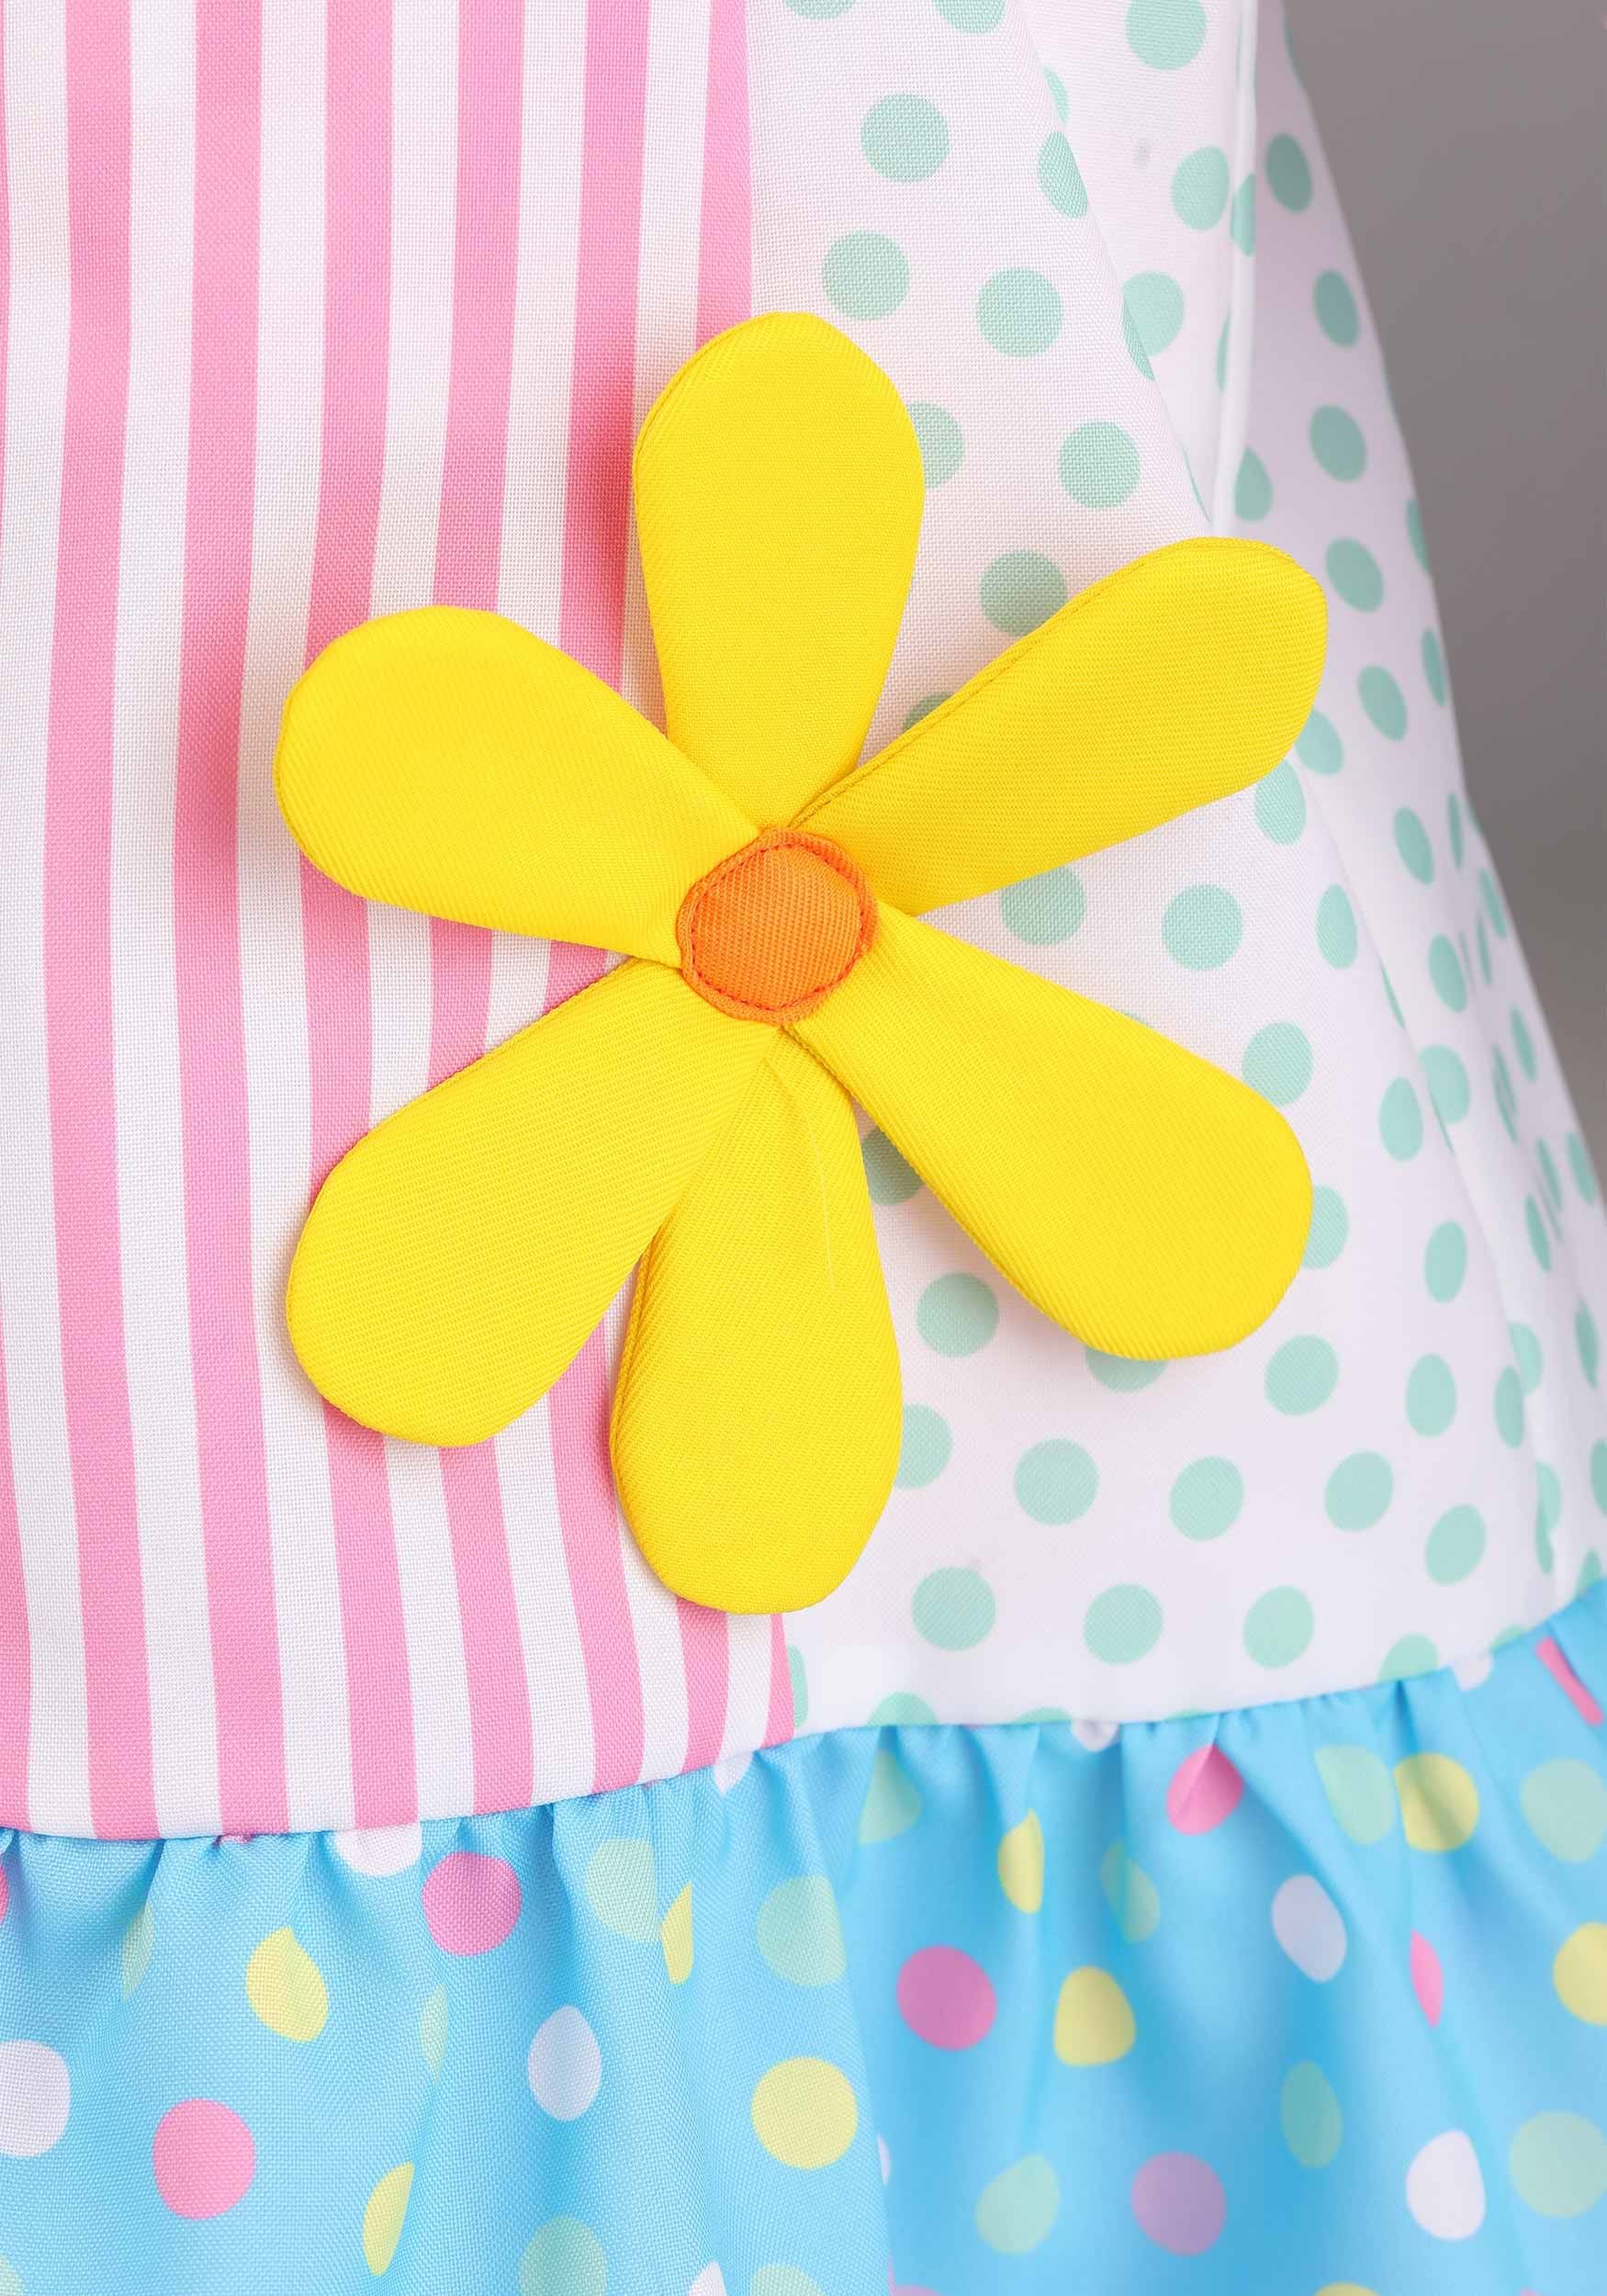 Pinafore Clown Costume For Toddlers